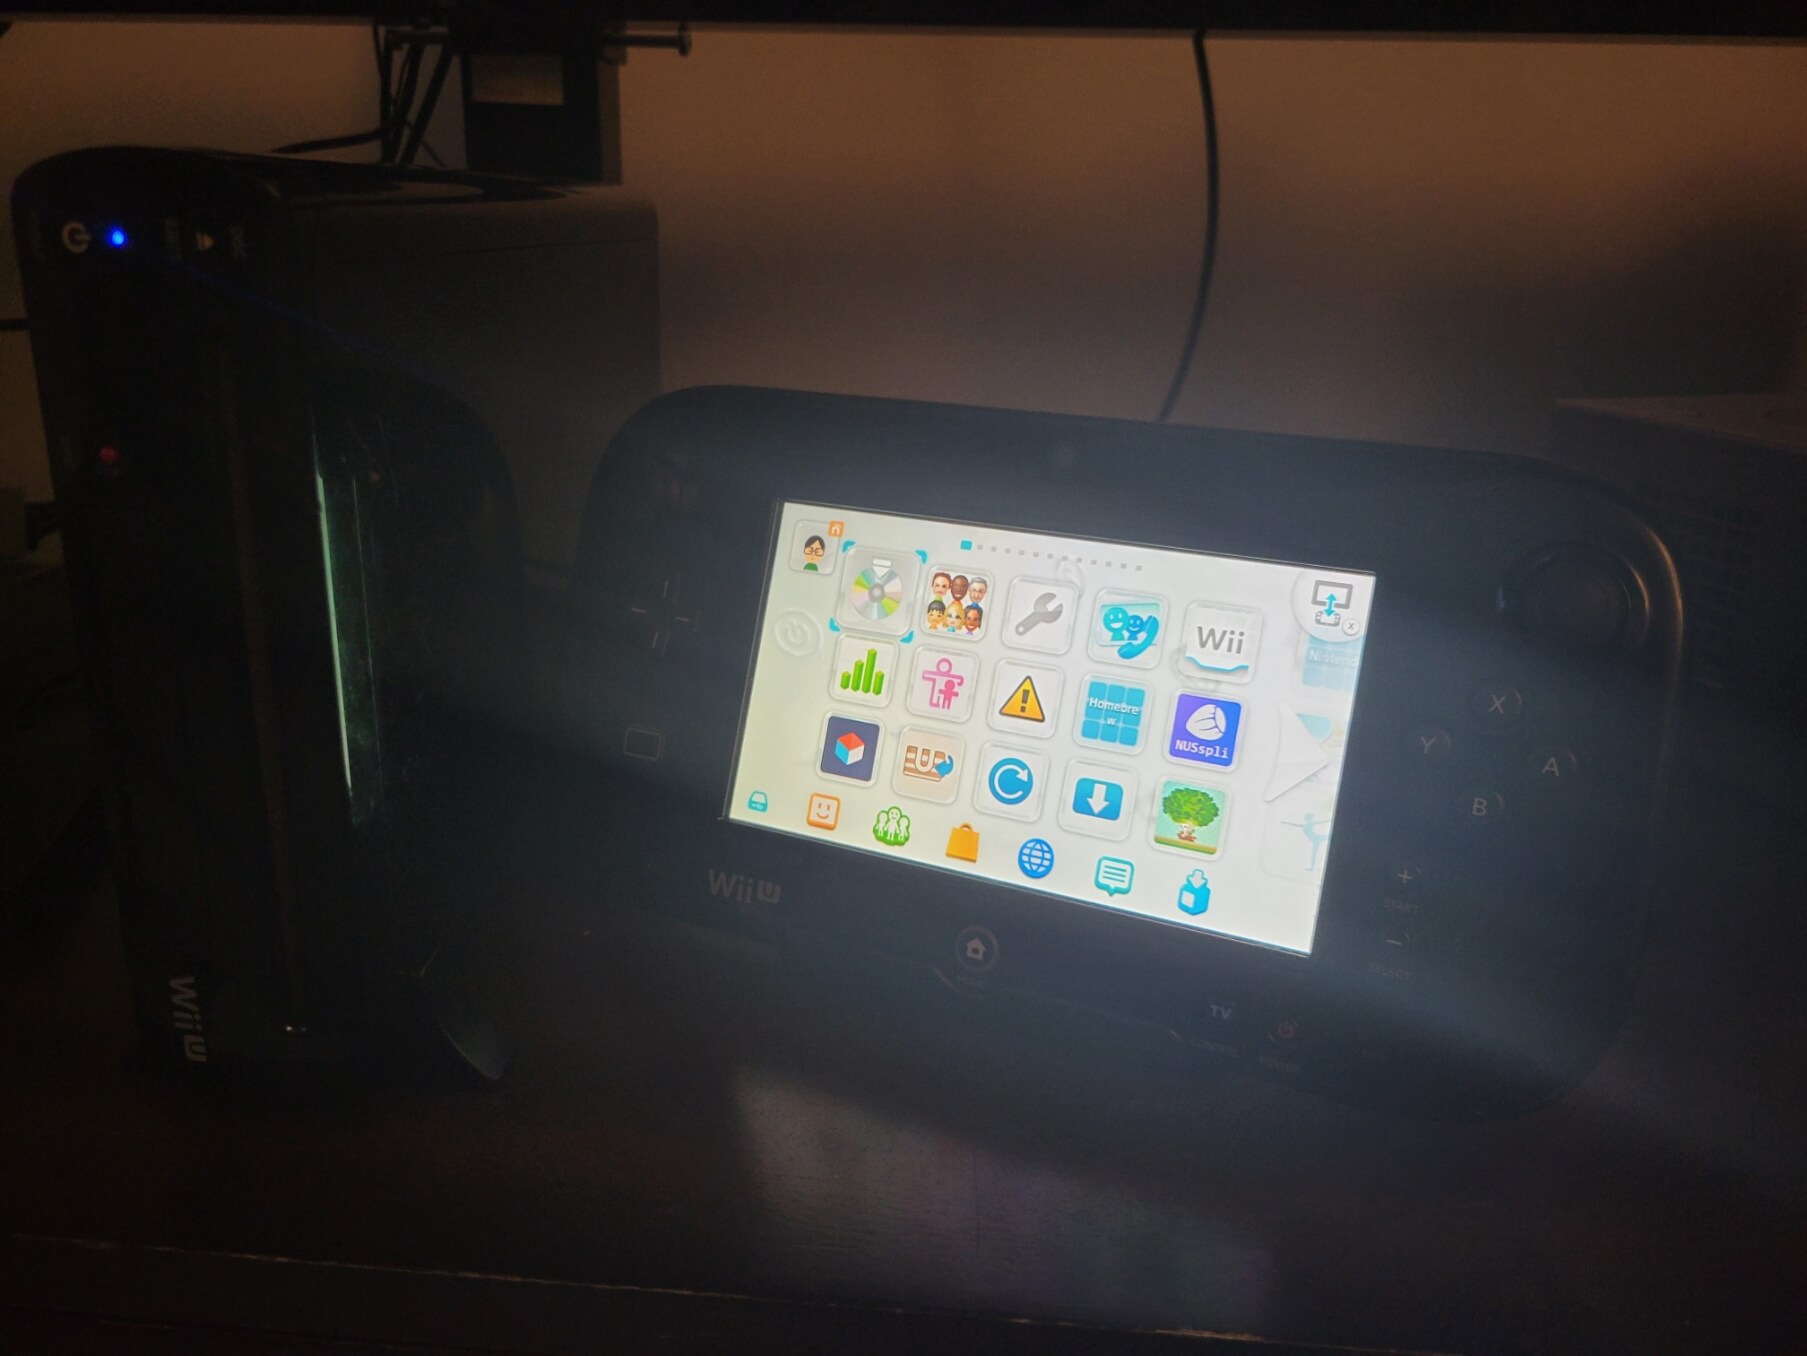 Wii U with Gamepad, showing homebrew apps